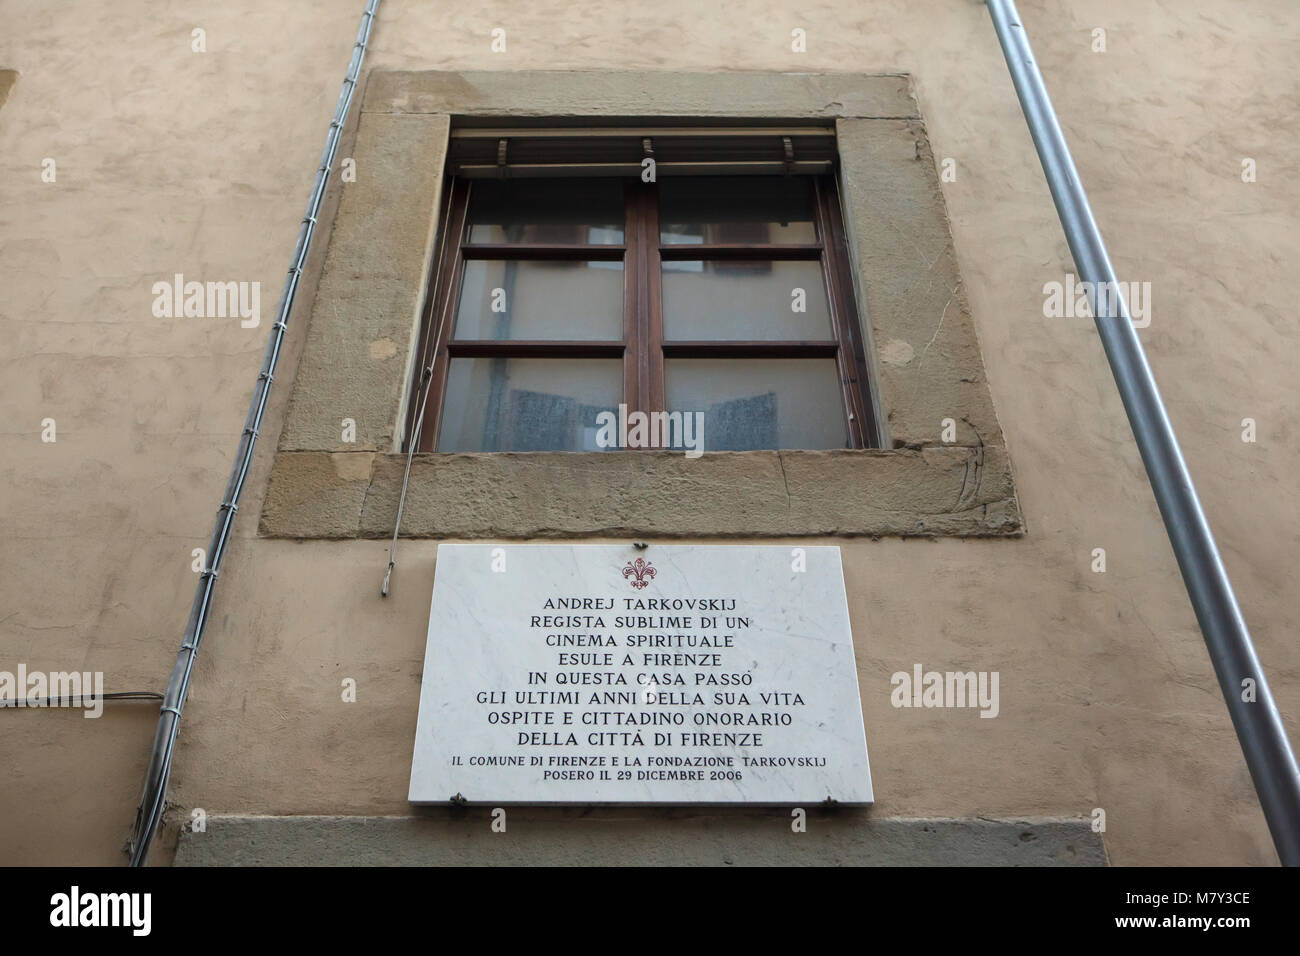 Commemorative plaque on the house where Russian film director Andrei Tarkovsky lived in Via di San Niccolò 91 in Florence, Tuscany, Italy. Andrei Tarkovsky lived in this house from 1983 to 1986 and completed here the script of his last film The Sacrifice. Stock Photo